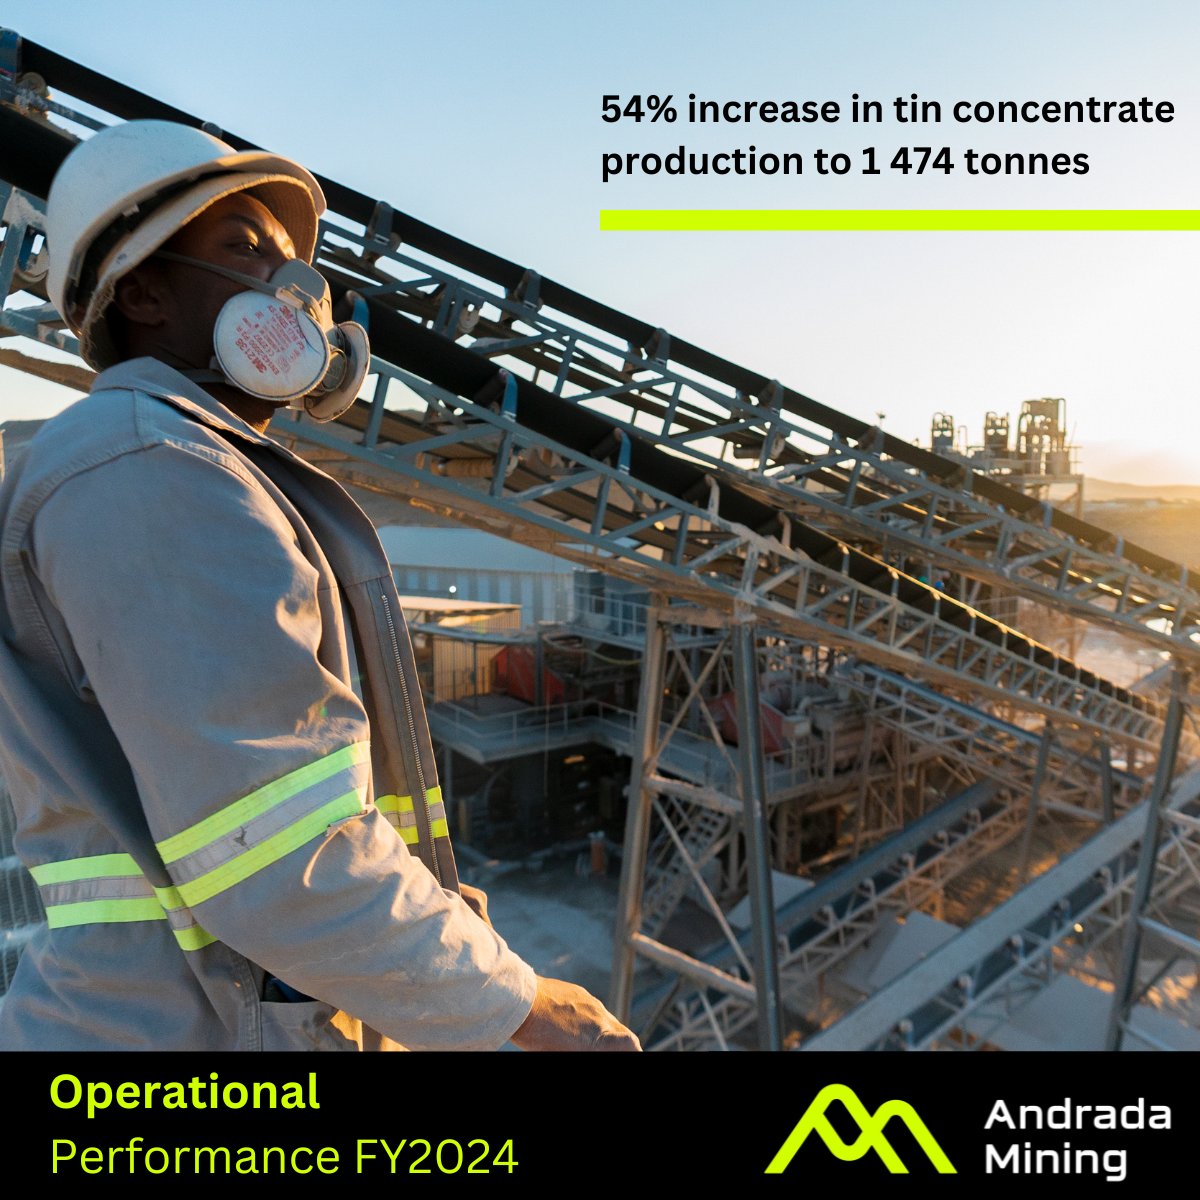 FY 2024 Operational Update : Andrada's tin concentrate production significantly increased by 54%, reaching an impressive 1,474 tonnes. Our expansion strategy solidifies us as a leading African critical metals producer. lnkd.in/dFJtVg3Z #ProductionBoost#CriticalMetals